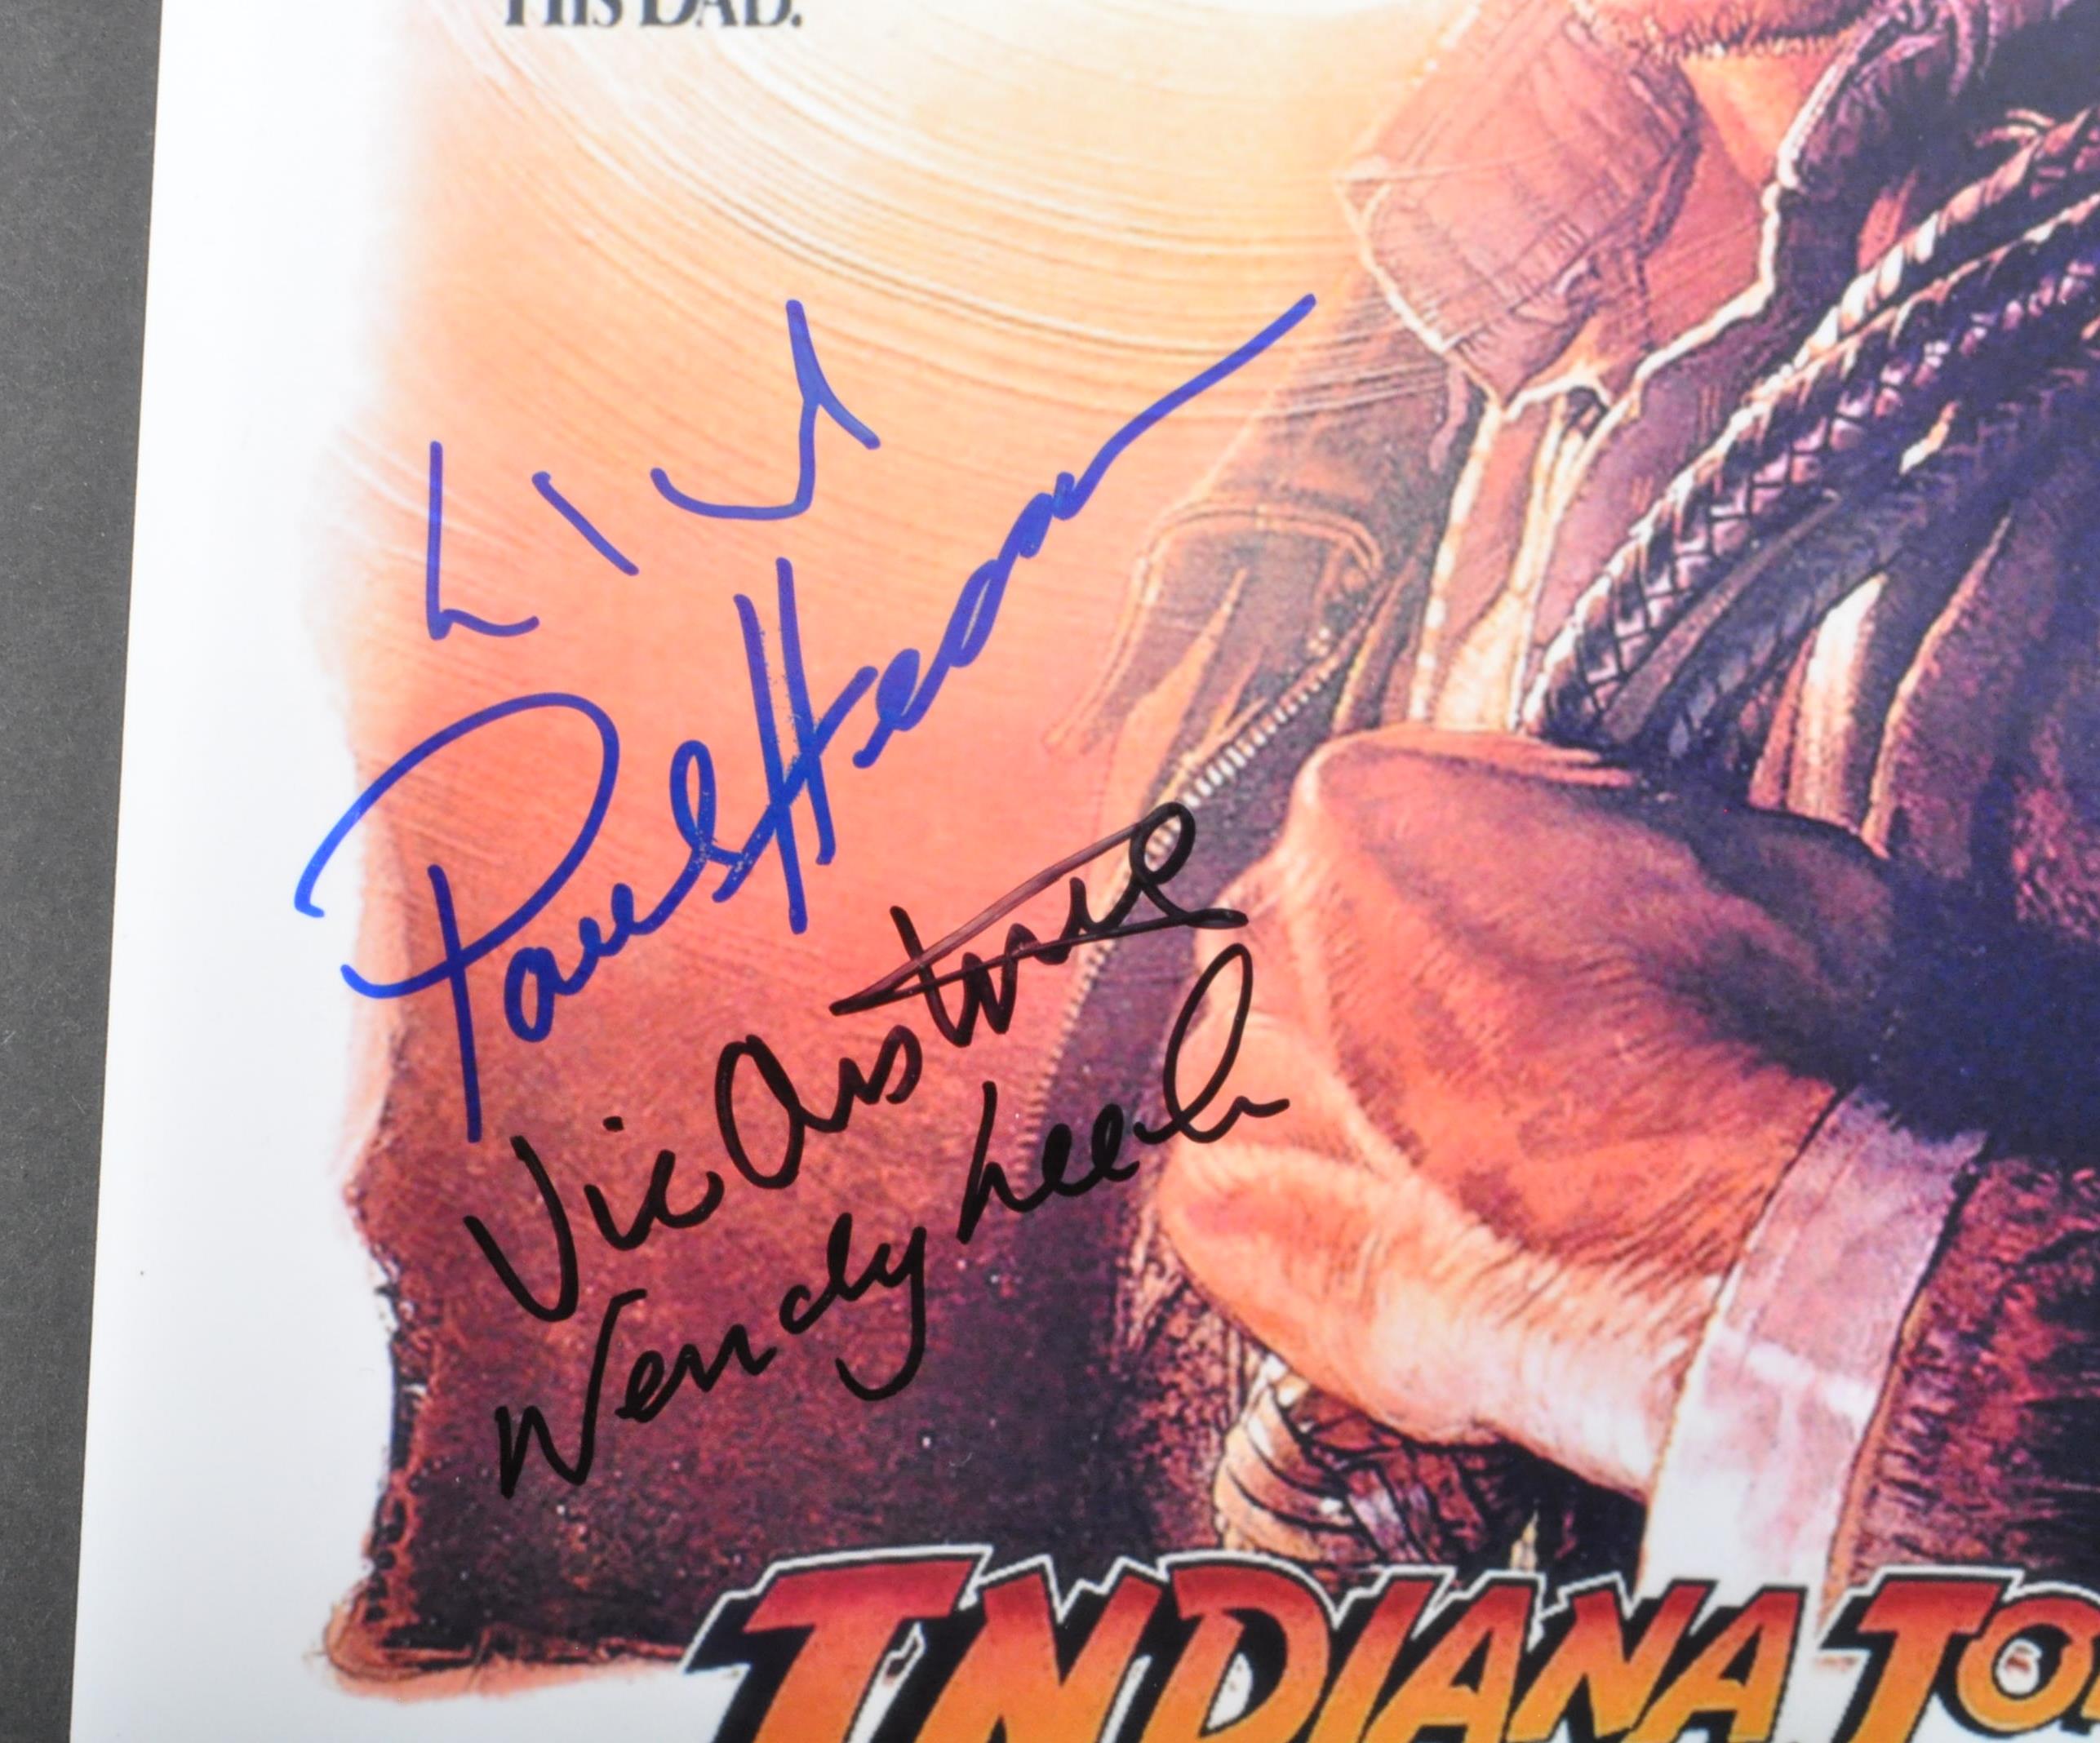 INDIANA JONES - THE LAST CRUSADE - X4 SIGNED 8X10" POSTER PHOTO - Image 2 of 2